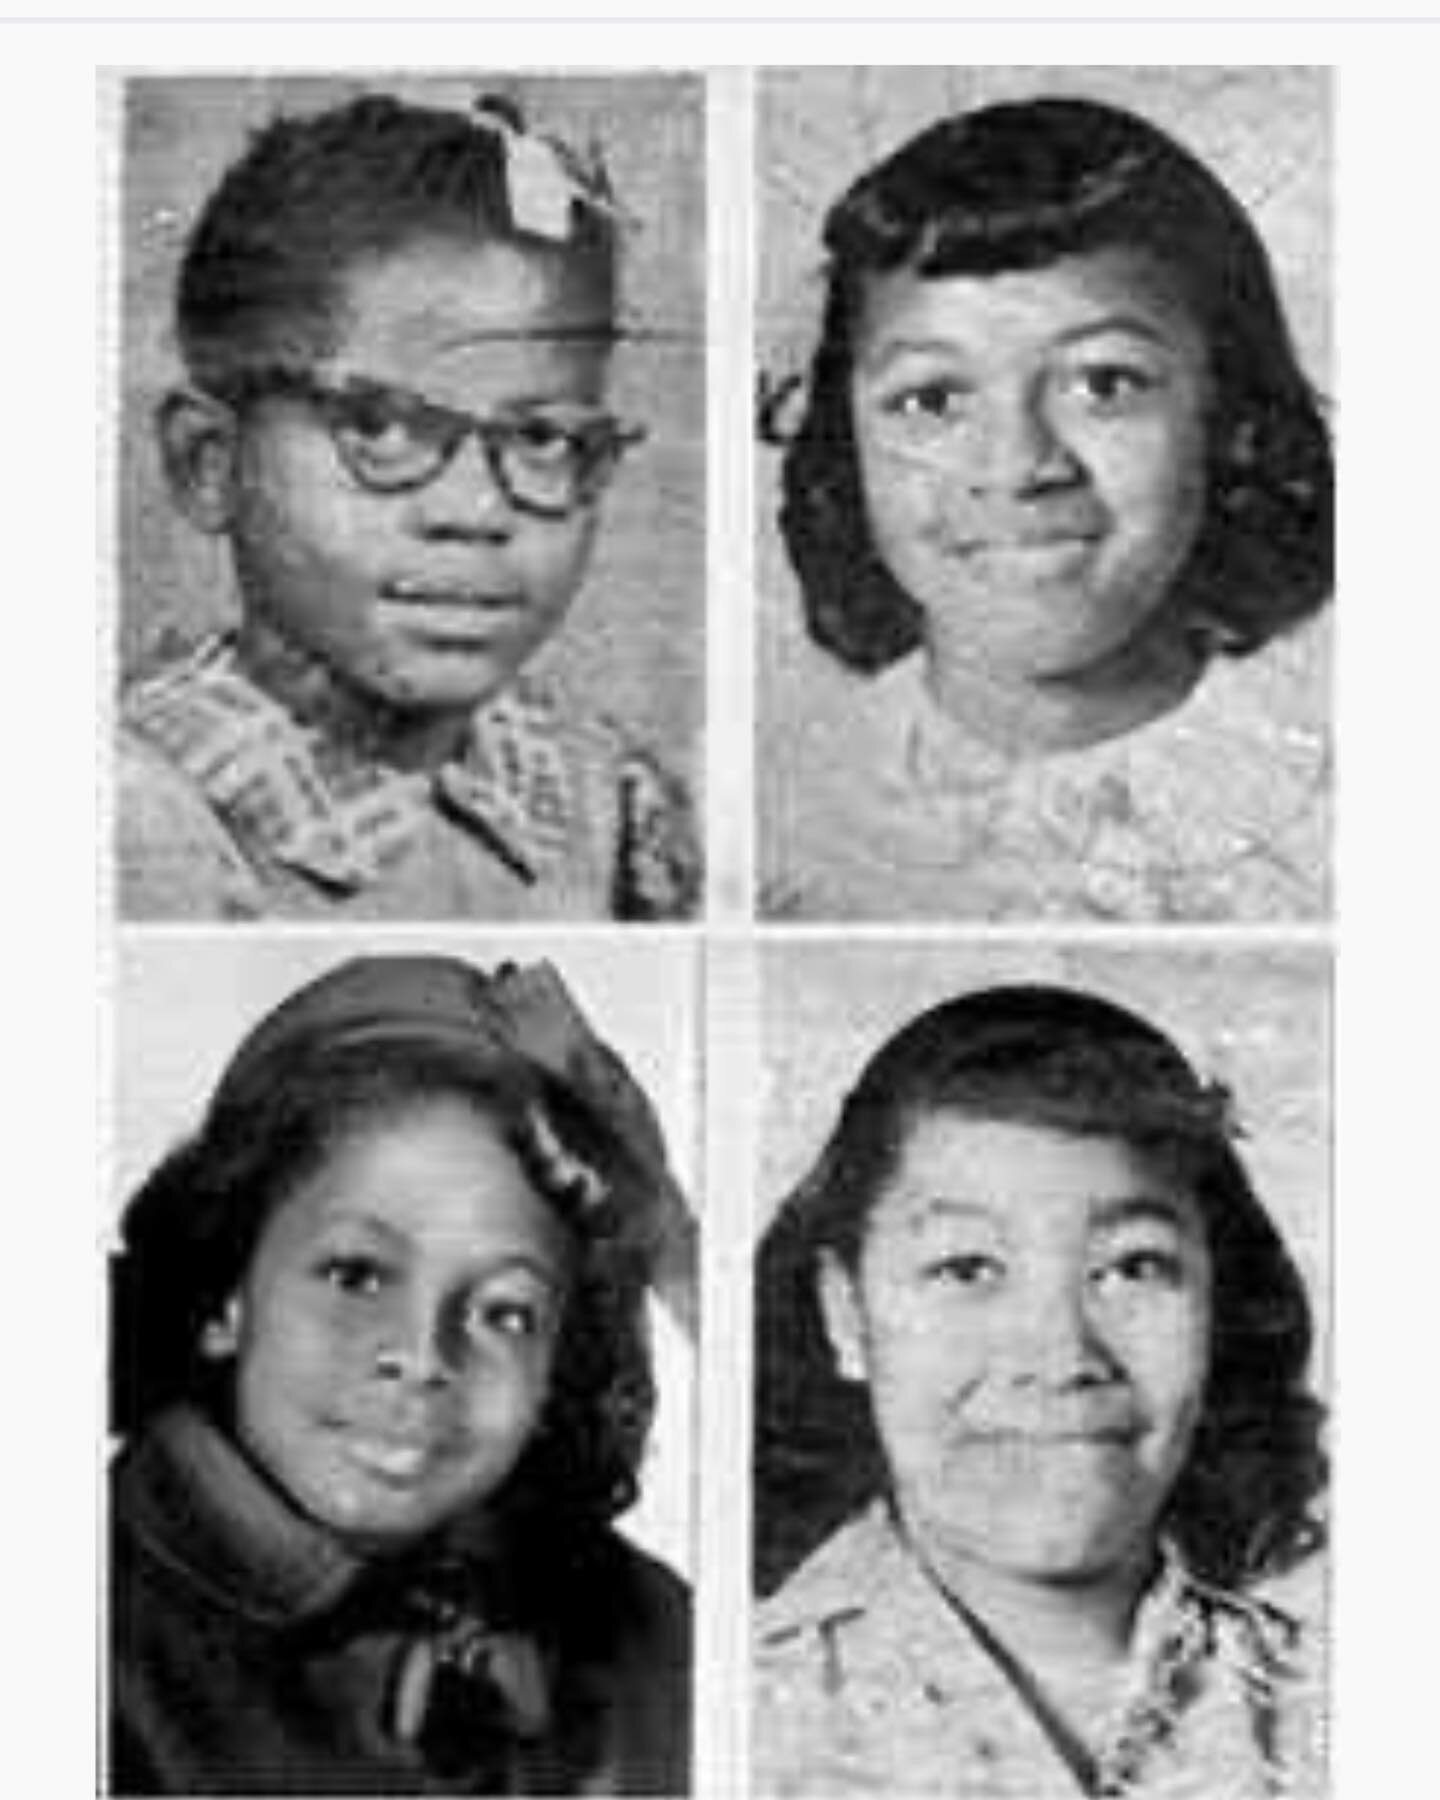 On a beautiful, bright Sunday morning in September, 1963 a bomb exploded at the 16th St Baptist Church &mdash; killing innocent children, four angels: Addie Mae Collins (14), Cynthia Wesley (14), Carole Robertson (14), and Carol Denise McNair (11) We